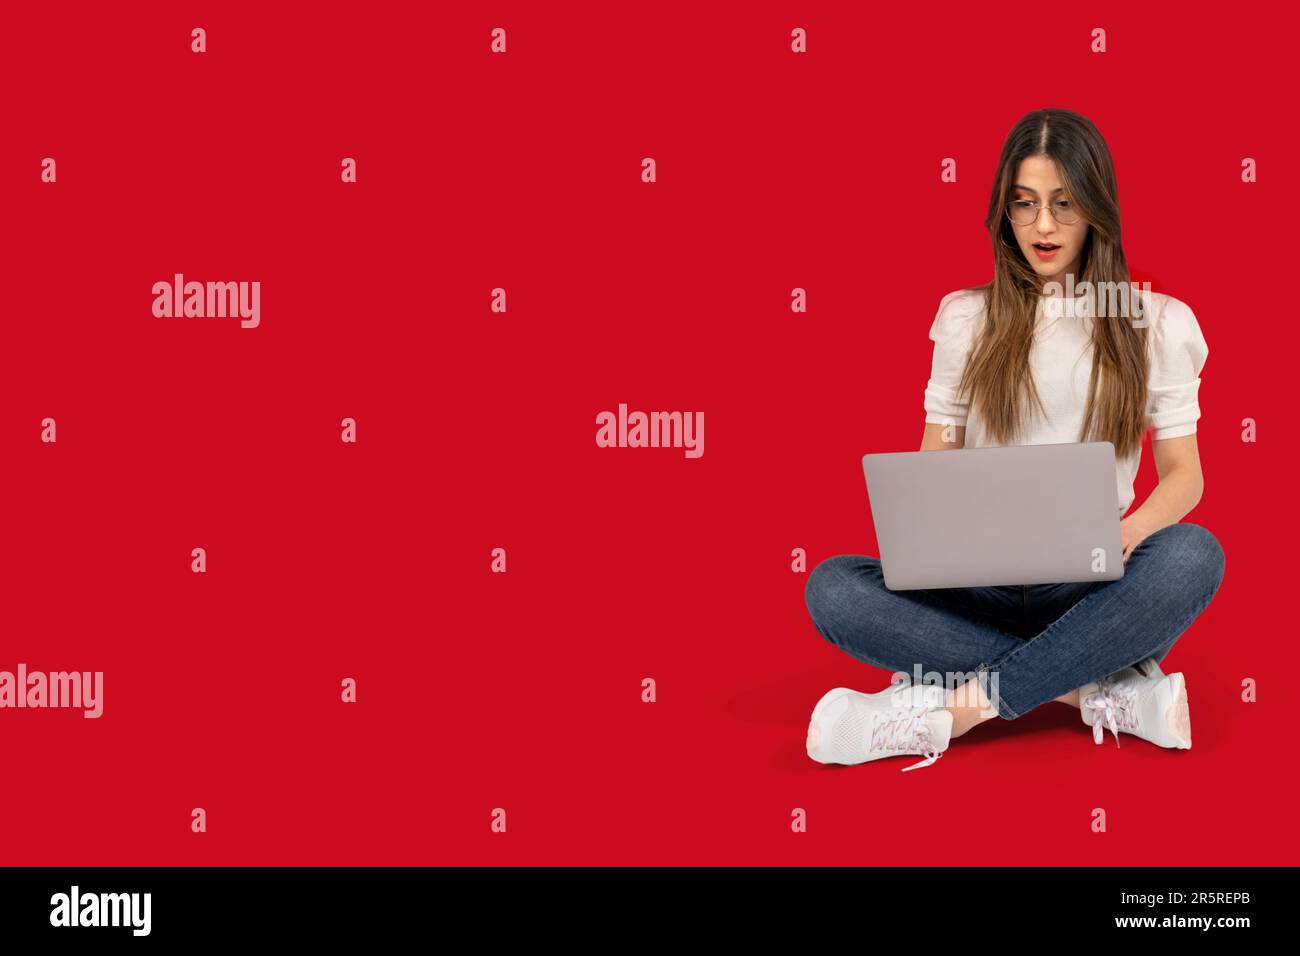 Full body length view of shocked woman. Brunette young girl sitting on the ground. Holding laptop looking screen surprised what she see. Stock Photo